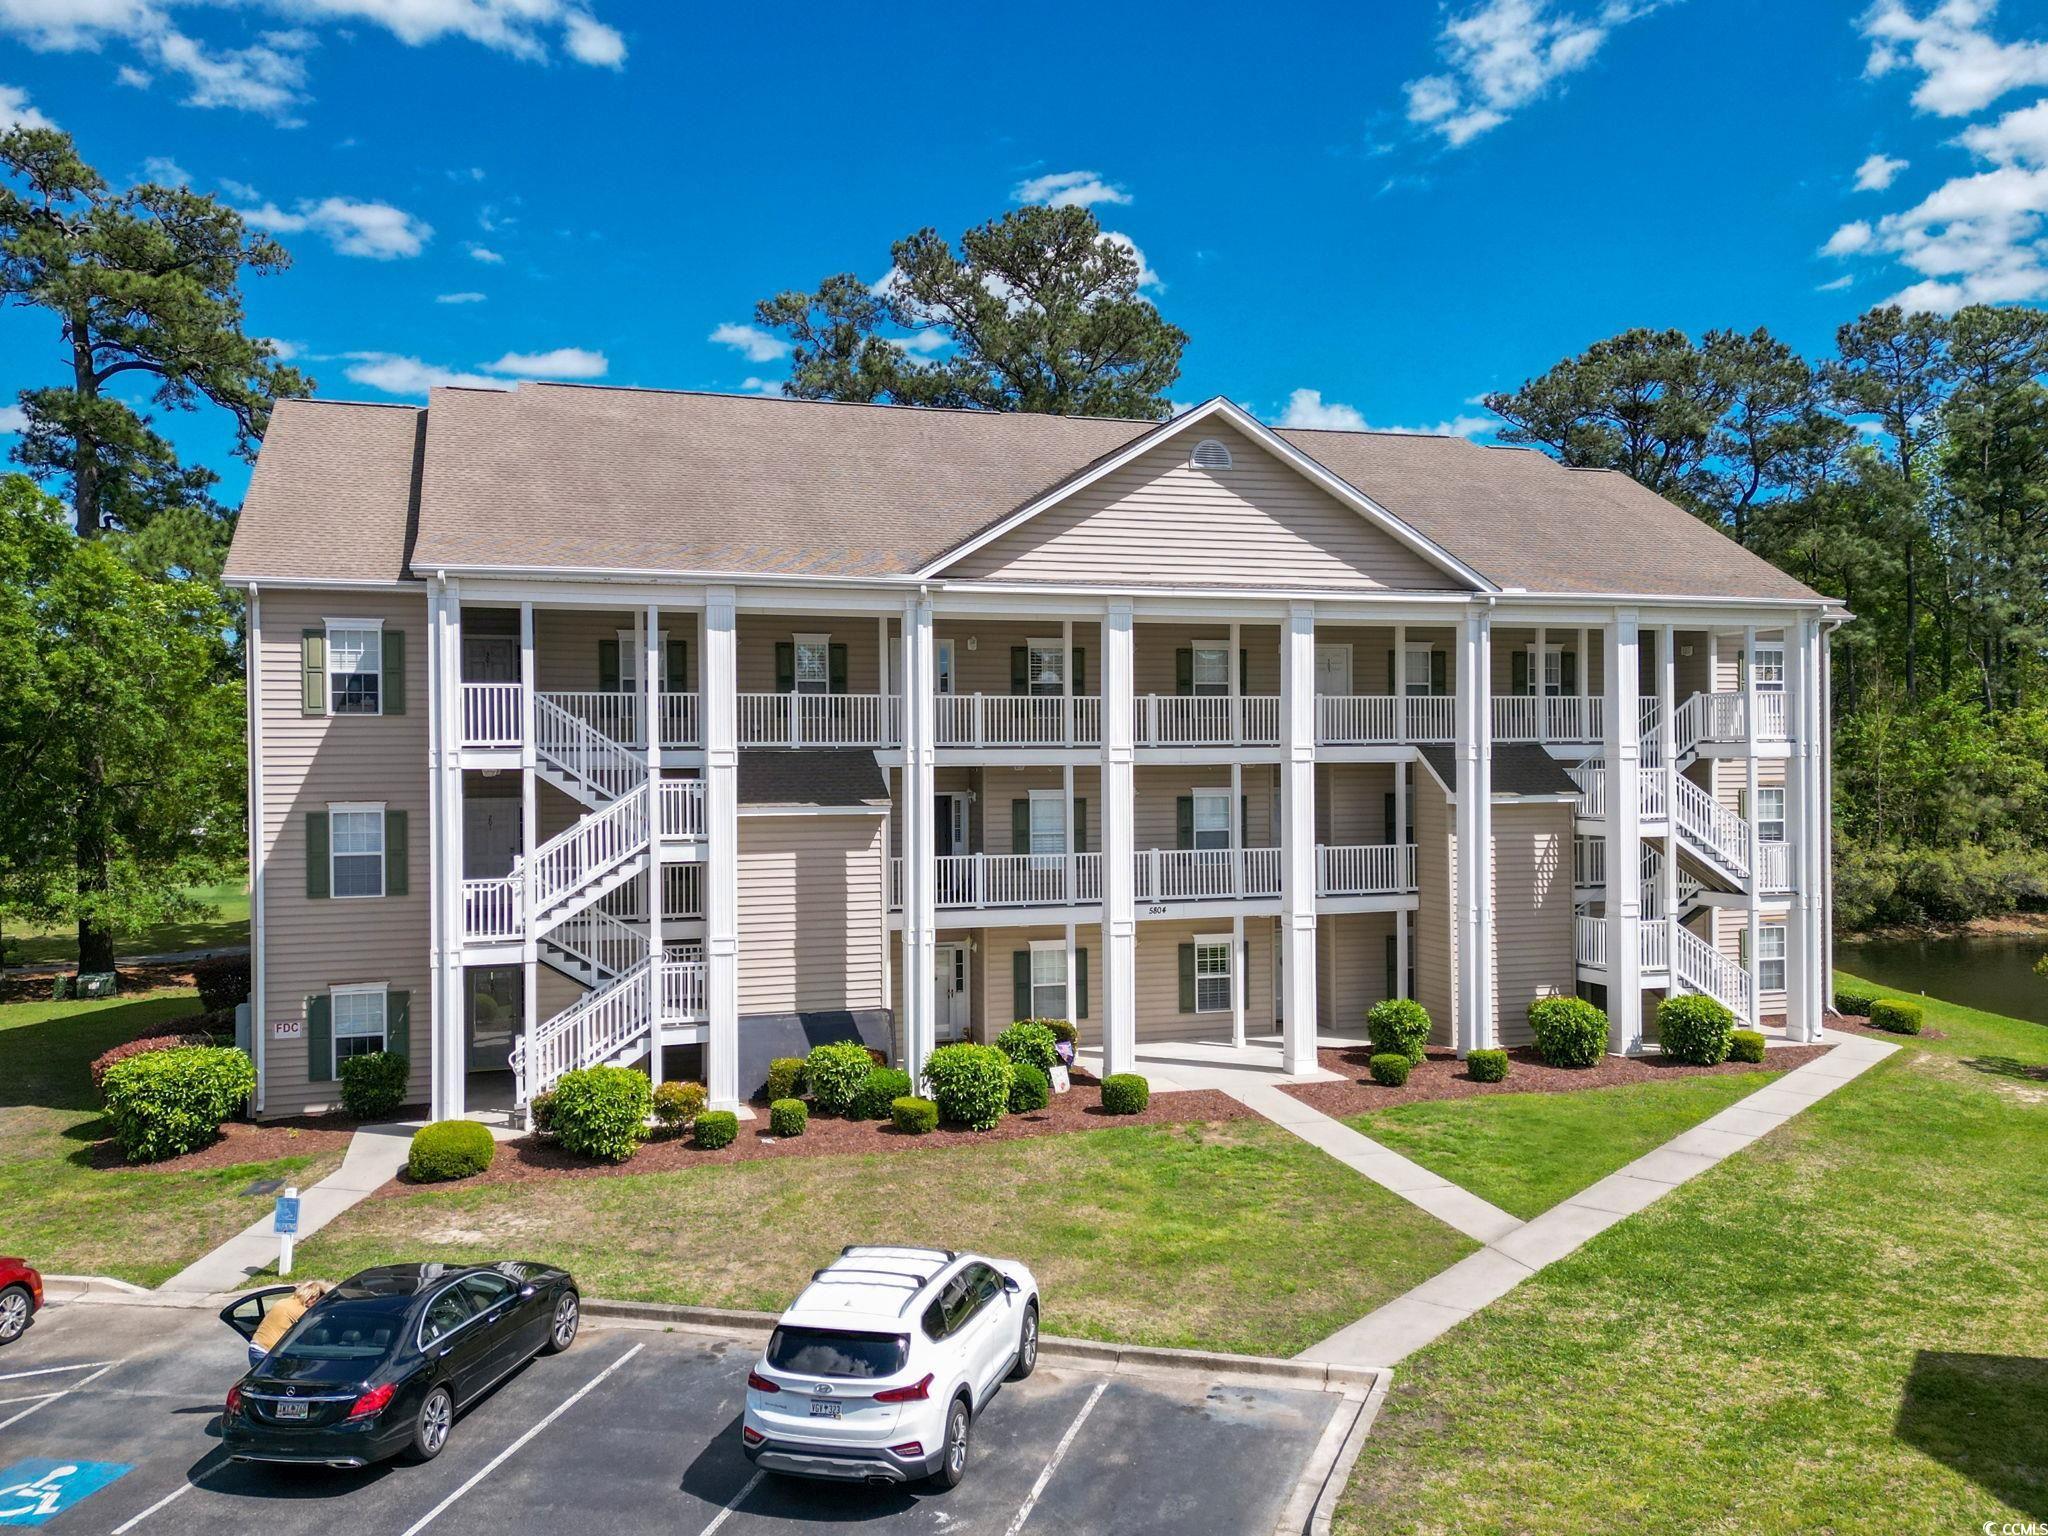 welcome to this first floor end unit, nestled in the blackmoor community of murrells inlet. entering the foyer, there are two bedrooms, one on each side of the entryway. make your way into the large and open concept living area with windows galore to make the home light and bright. off the spacious kitchen is a separate laundry room with both a washer and dryer with plenty of shelving and cabinetry. the primary bedroom has a large walk-in closet, a linen closet, and an ensuite bath. enjoy views of the 2nd hole of gary player’s only grand strand signature golf course, built on the historic longwood plantation. relax on your screened-in patio, while watching the golfers and maybe even partake in your favorite beverage. included is a large, separate storage unit. enjoy the community pool, grilling area, and clubhouse. conveniently located minutes to the beach, murrells inlet marshwalk, dining, golfing, shopping, huntington beach state park market common, and medical facilities.